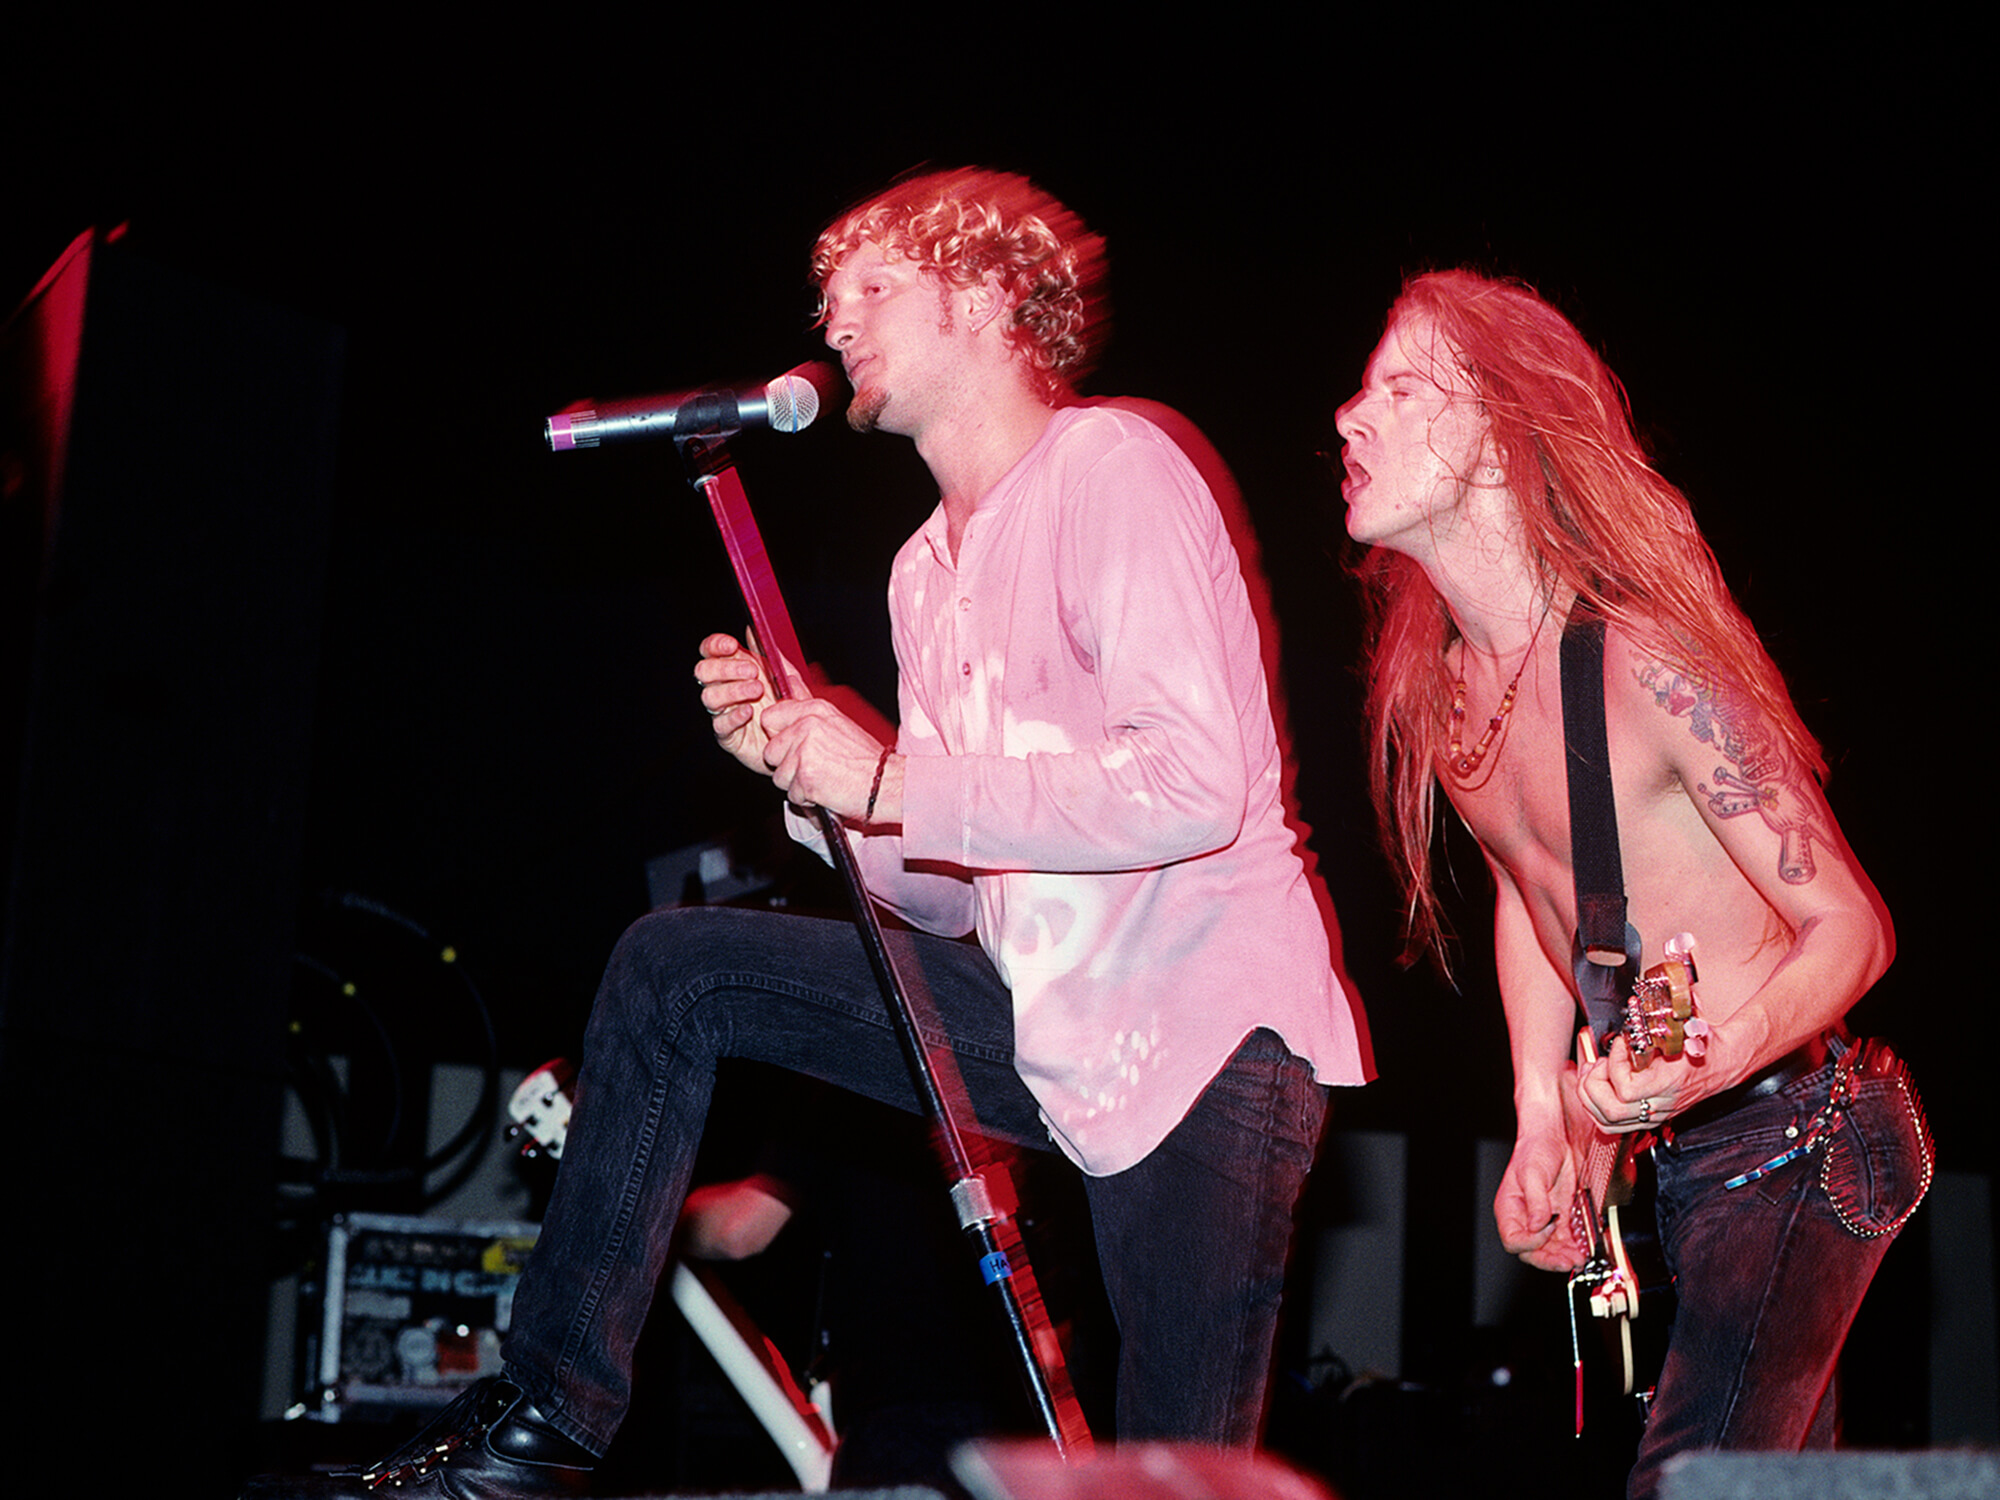 Layne Stanley and Jerry Cantrell of Alice in Chains performing in 1992, photo by Ebet Roberts/Redferns via Getty Images